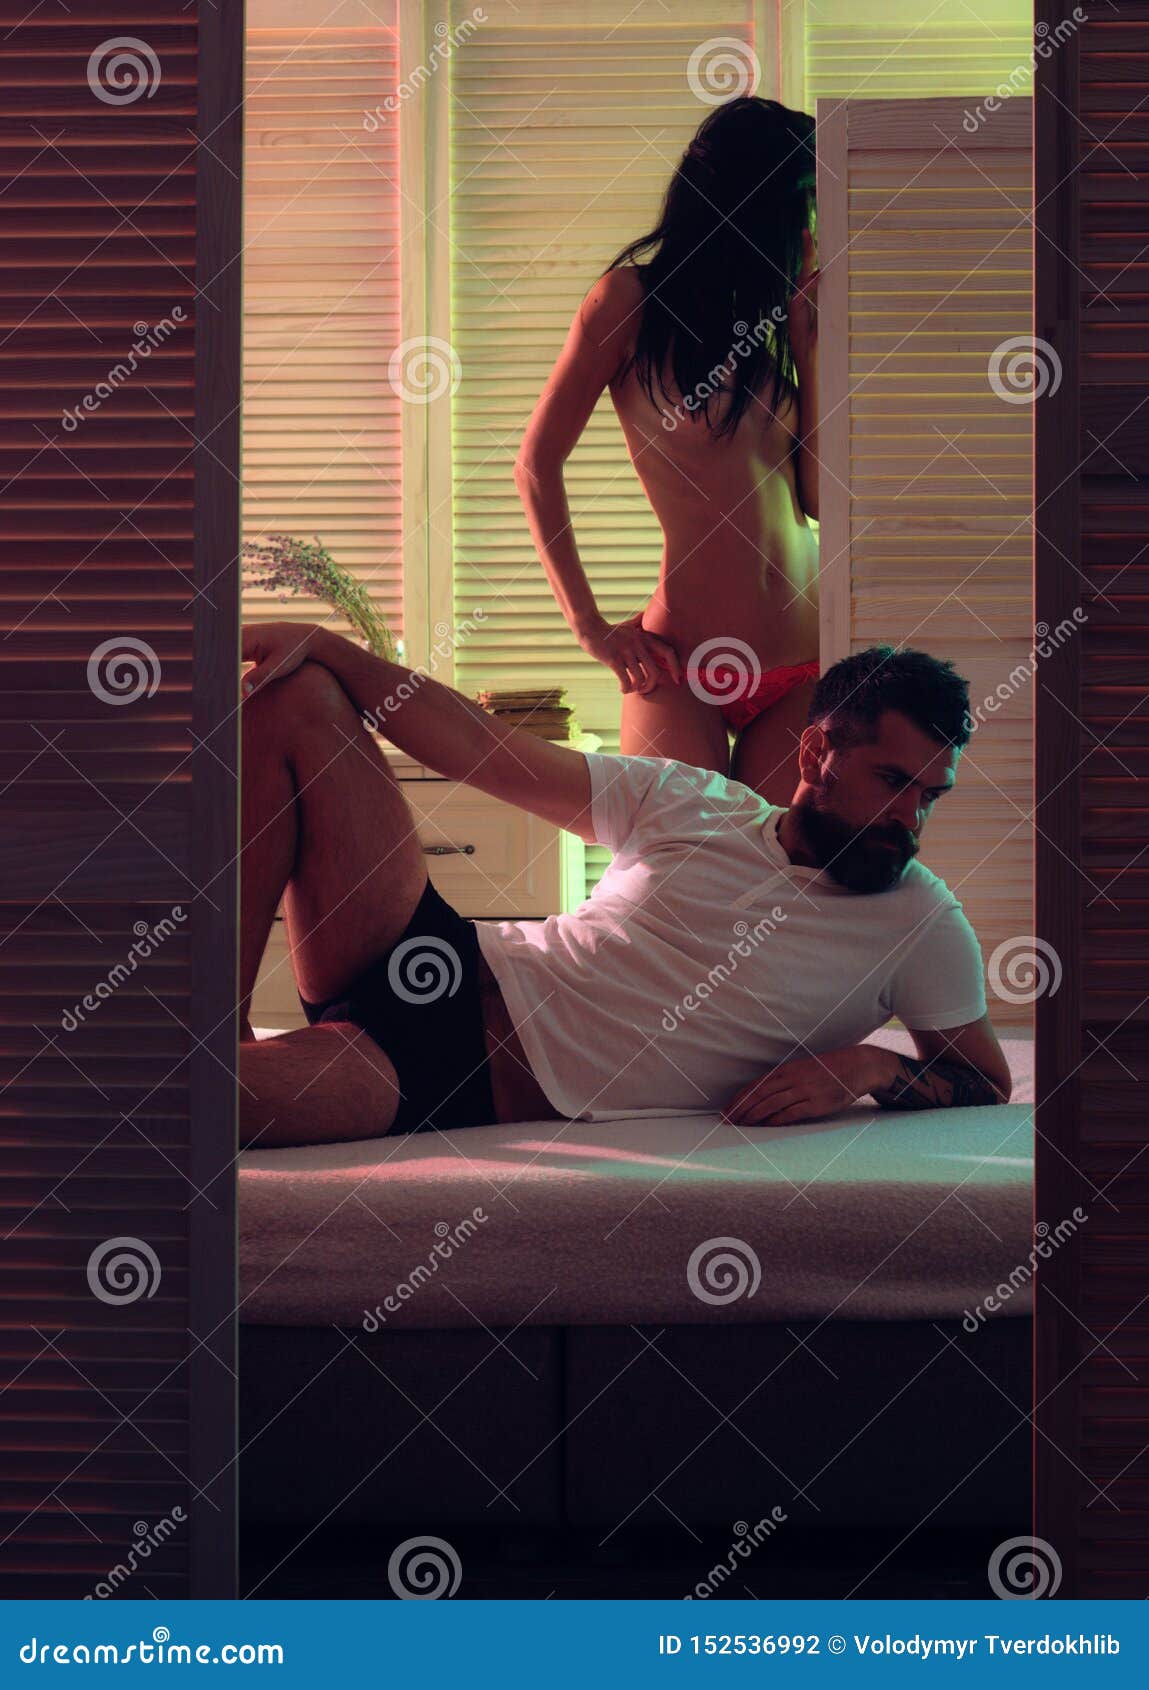 How Deal with Male Indifference. Lost Interest in Sex Life photo image